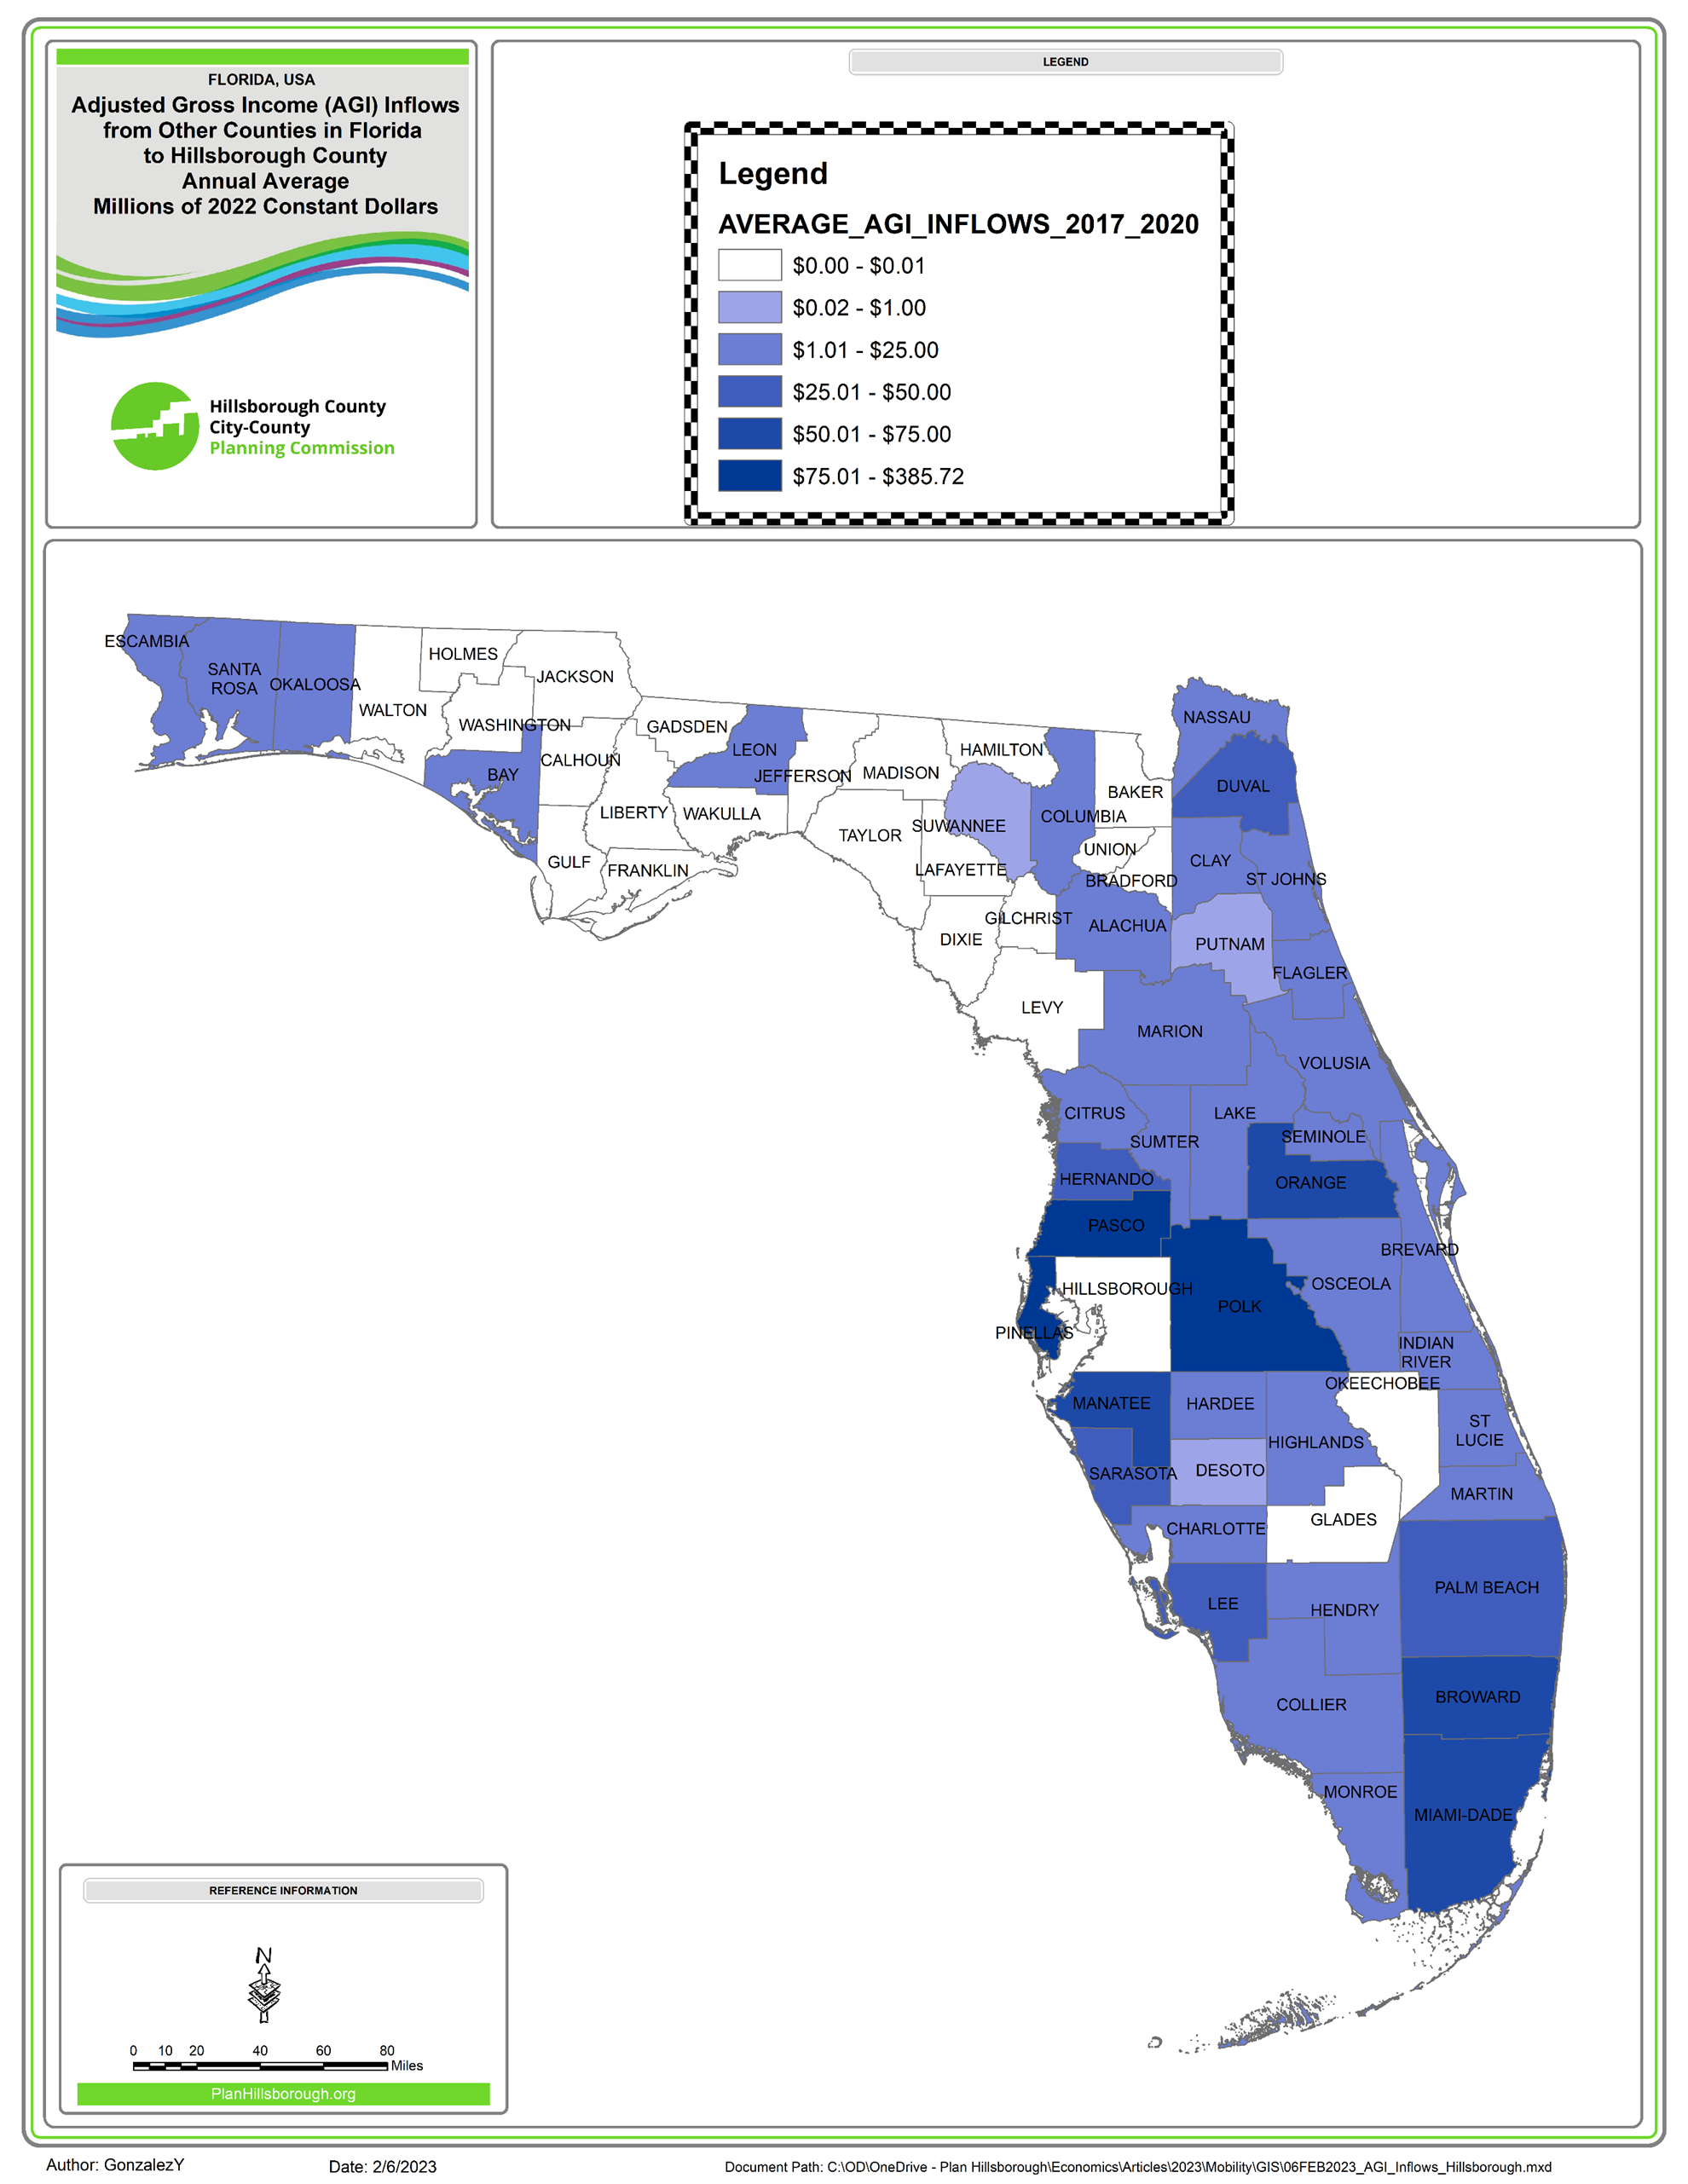 Map shows Florida Counties from which new households moving to Hillsborough County originate. The counties are classified by the number of new households that move to Hillsborough County from there. Manatee, Orange, Pasco, Pinellas, and Polk send over 1,000 new households to Hillsborough County yearly.